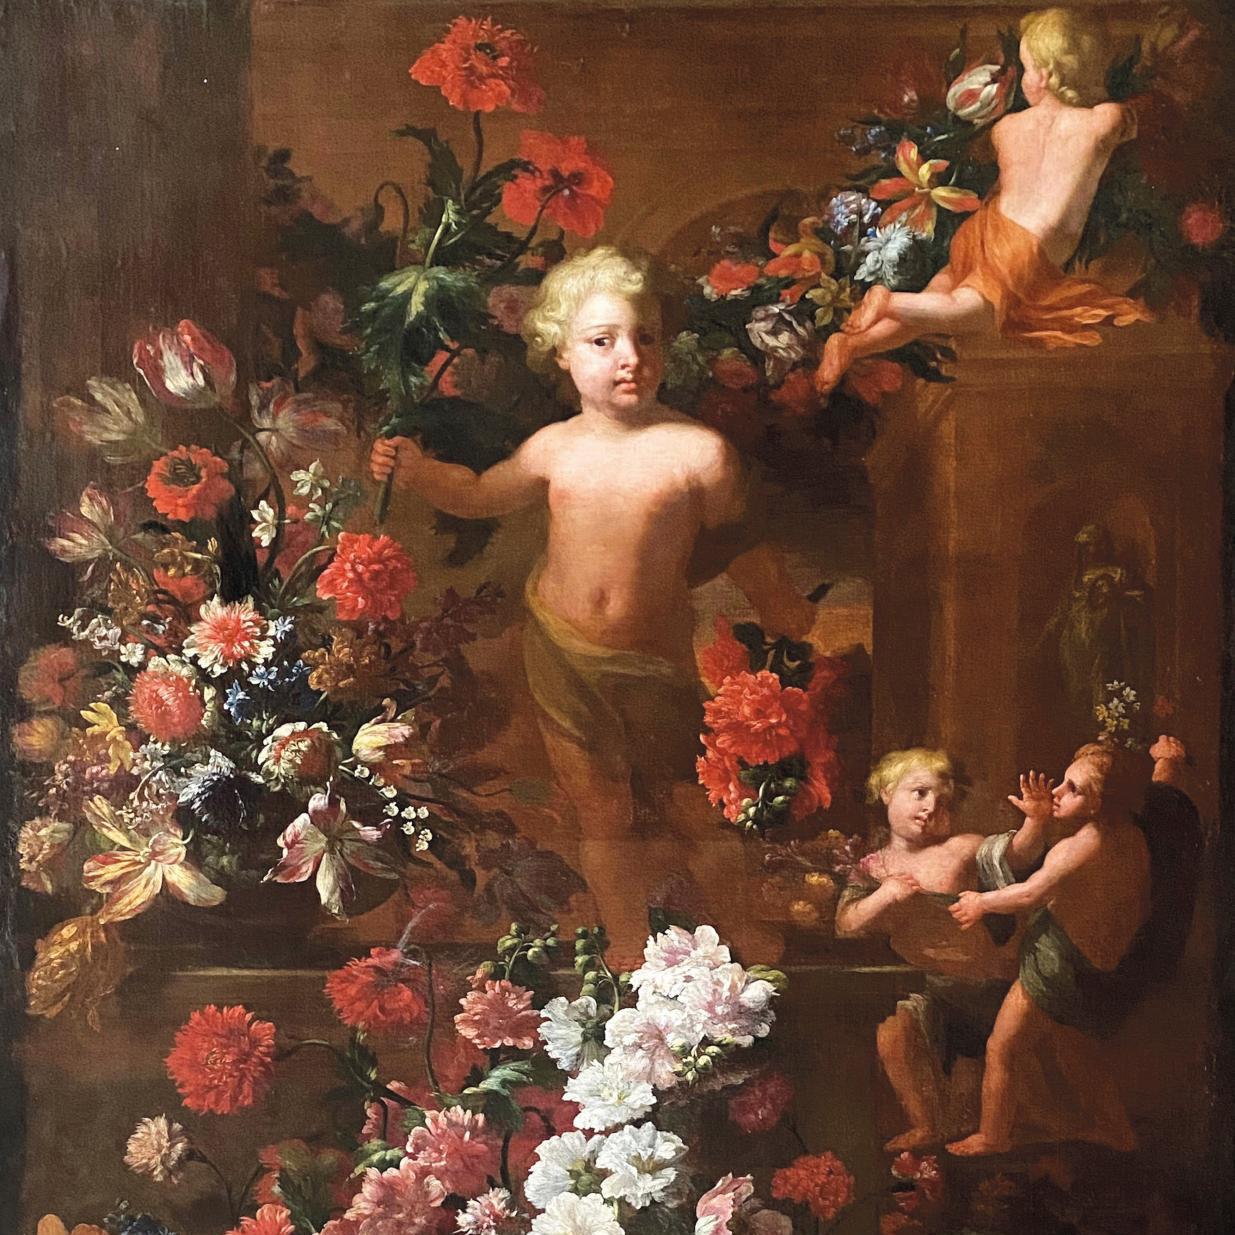 Monnoyer and the Love of Flowers During the Reign of Louis XIV - Pre-sale